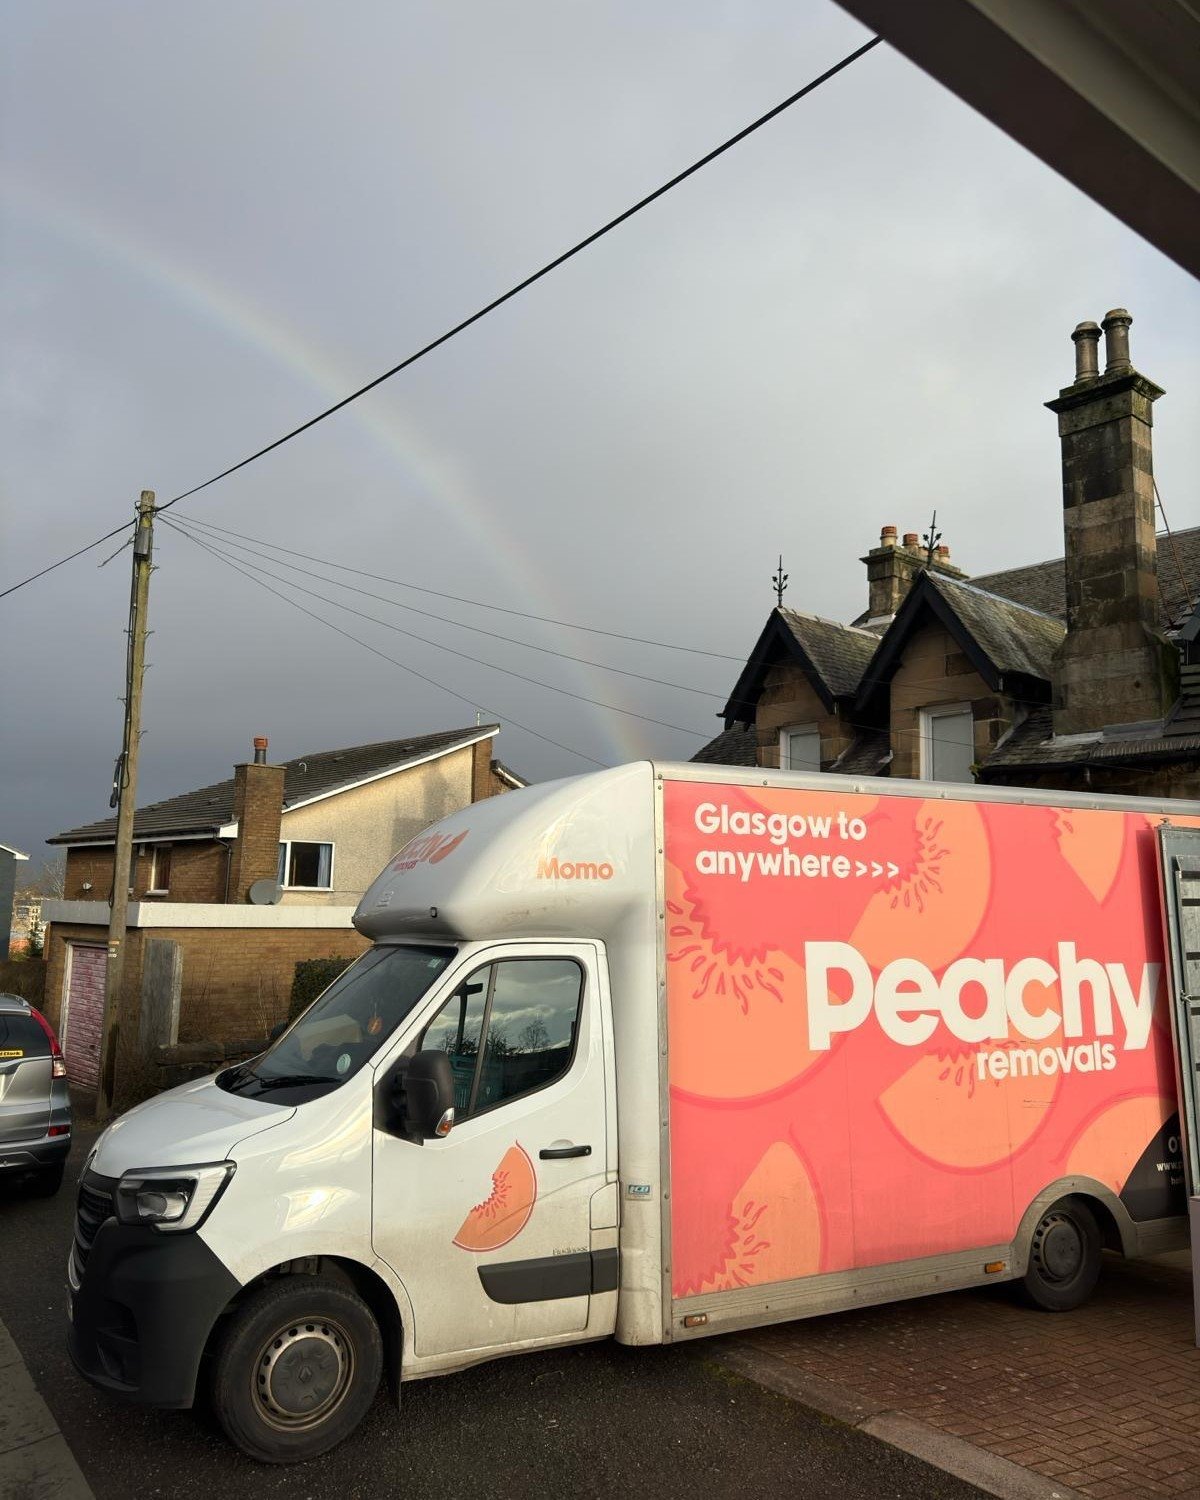 Complimentary rainbow included where possible. That's got to be a good house move omen 🌈✨🍑
.
.
.
.
.
#housemove #removals #removalscompany #professionalmovers #peachy #movingandstorage #moversandpackers #packing #movers #moving #movingday #movingco